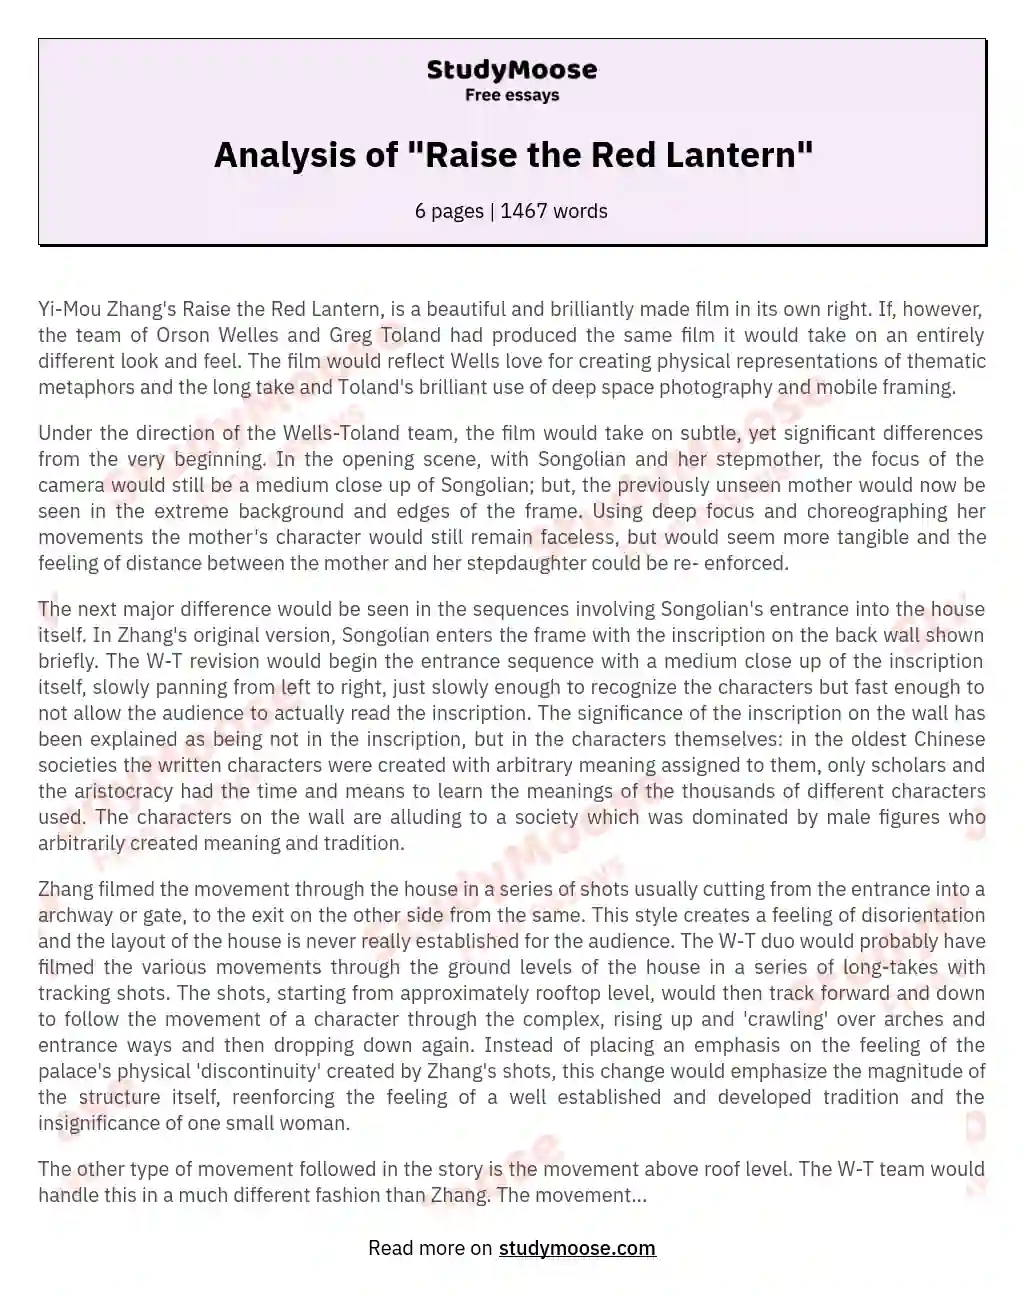 Aesthetic Changes in "Raise the Red Lantern" by Wells-Toland essay